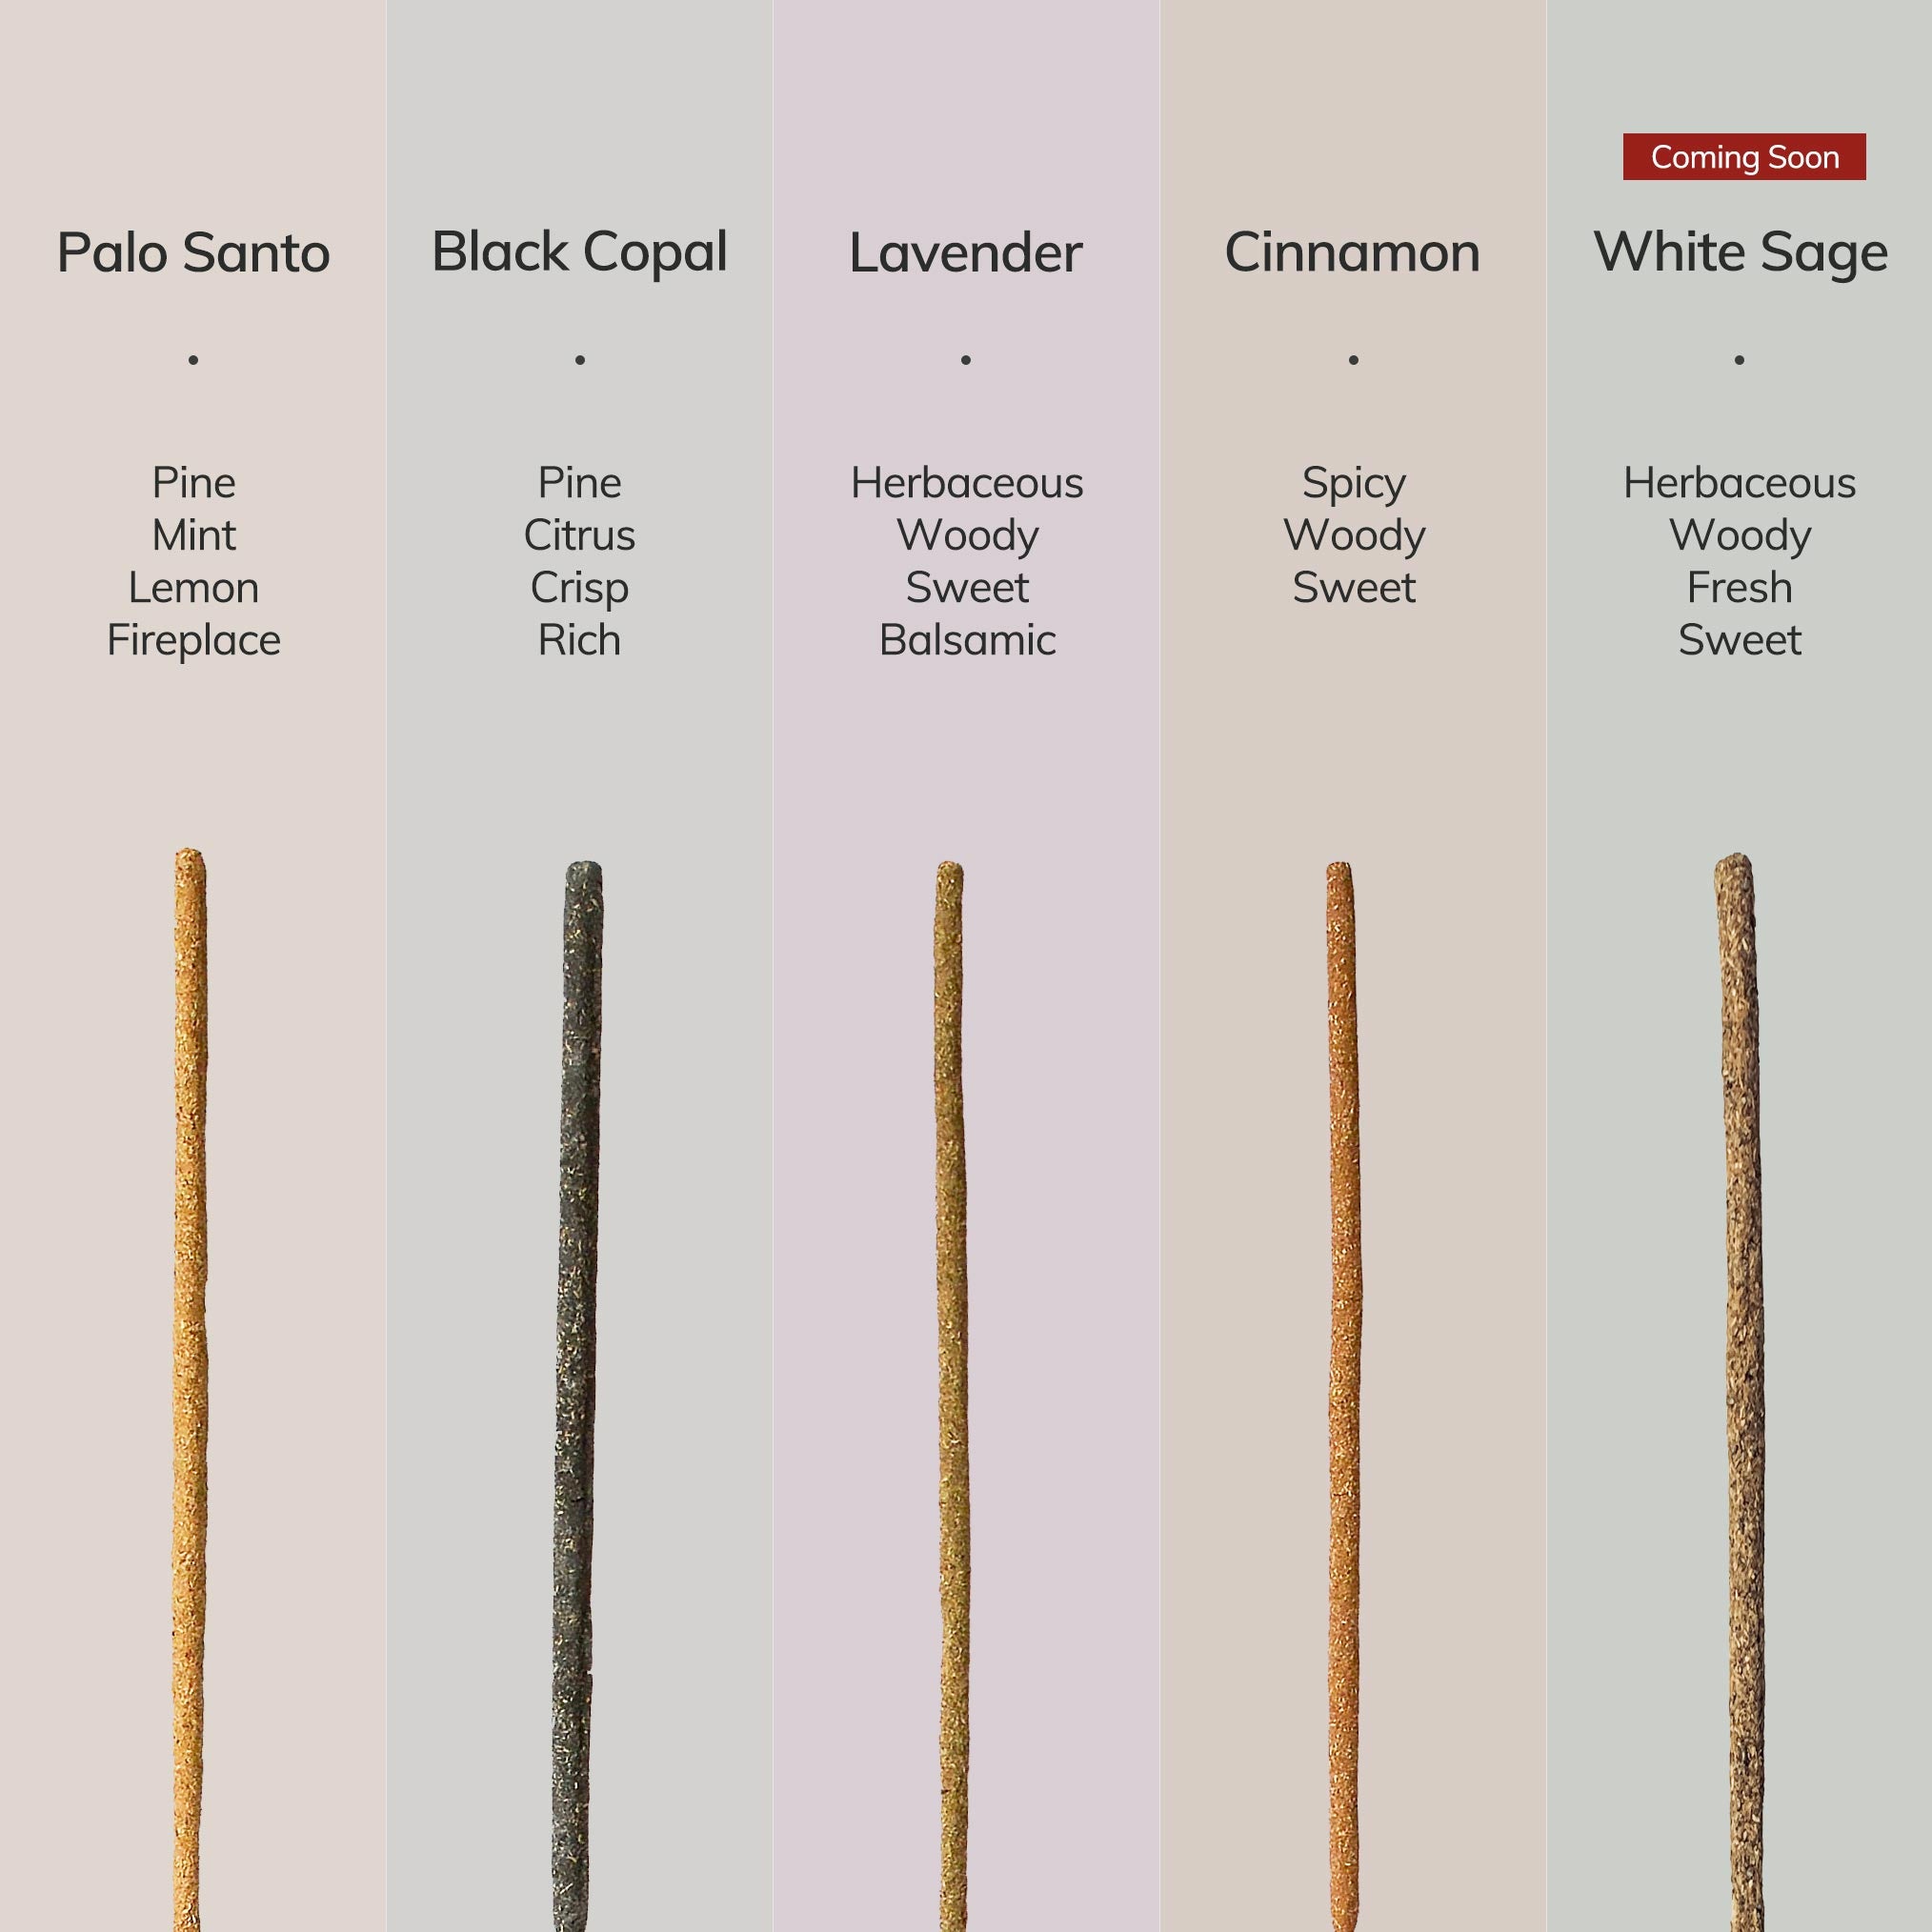 5 different types of incense sticks and the scents: Palo Santo, Black Copal, Lavender, Cinnamon, White Sage.